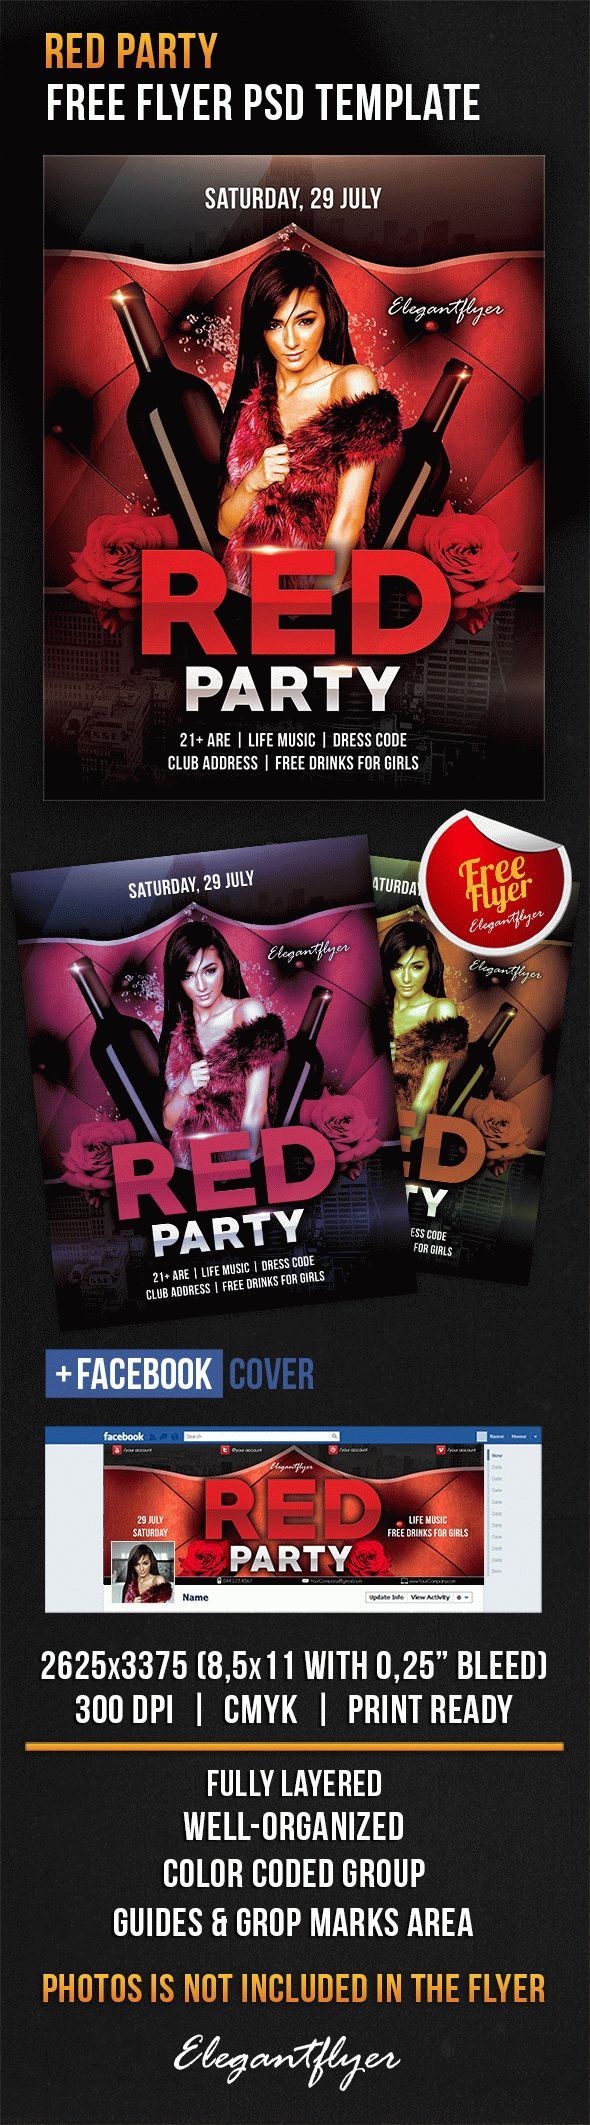 All Red Party by ElegantFlyer